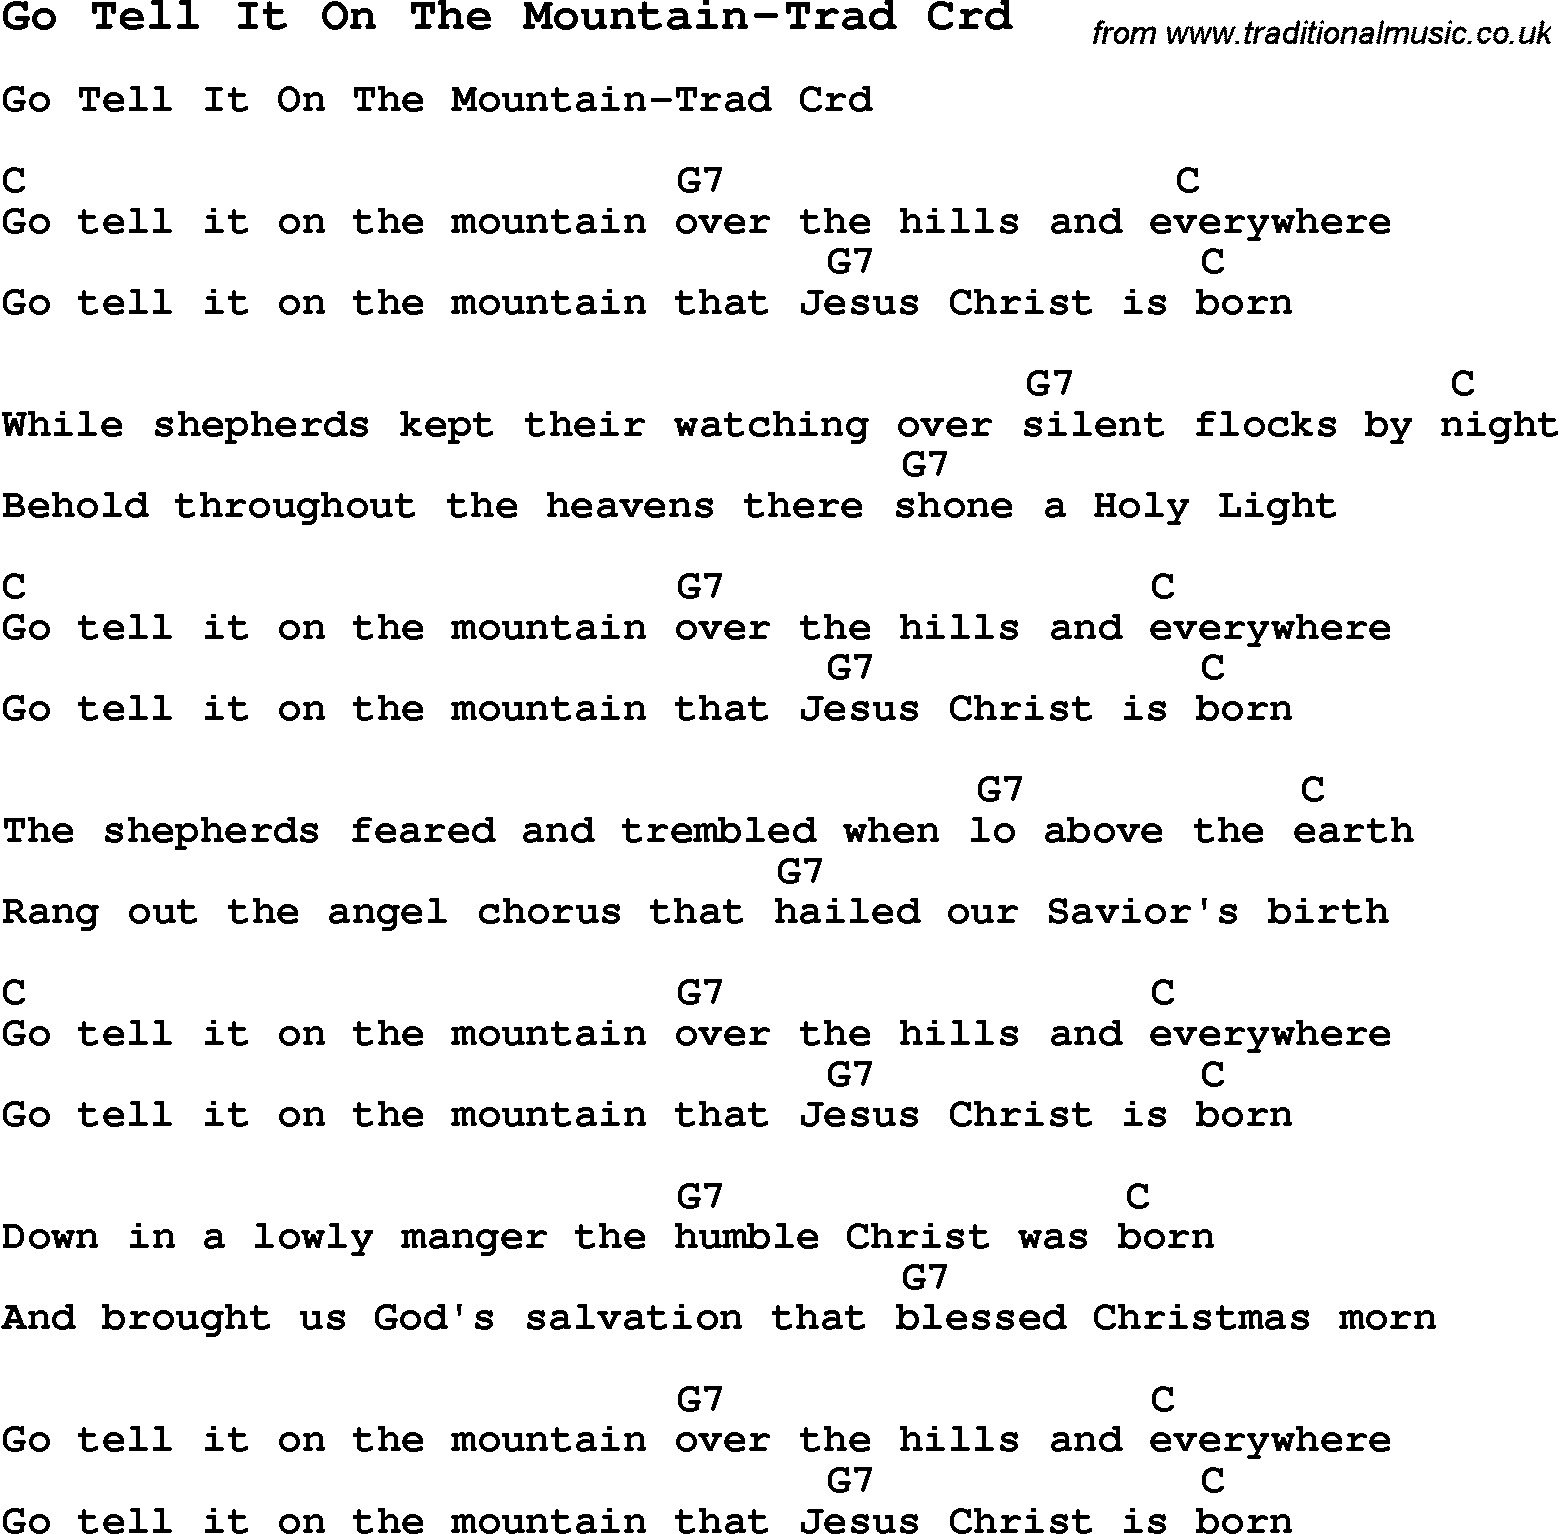 Skiffle Lyrics for Go Tell It On The MountainTrad with chords for